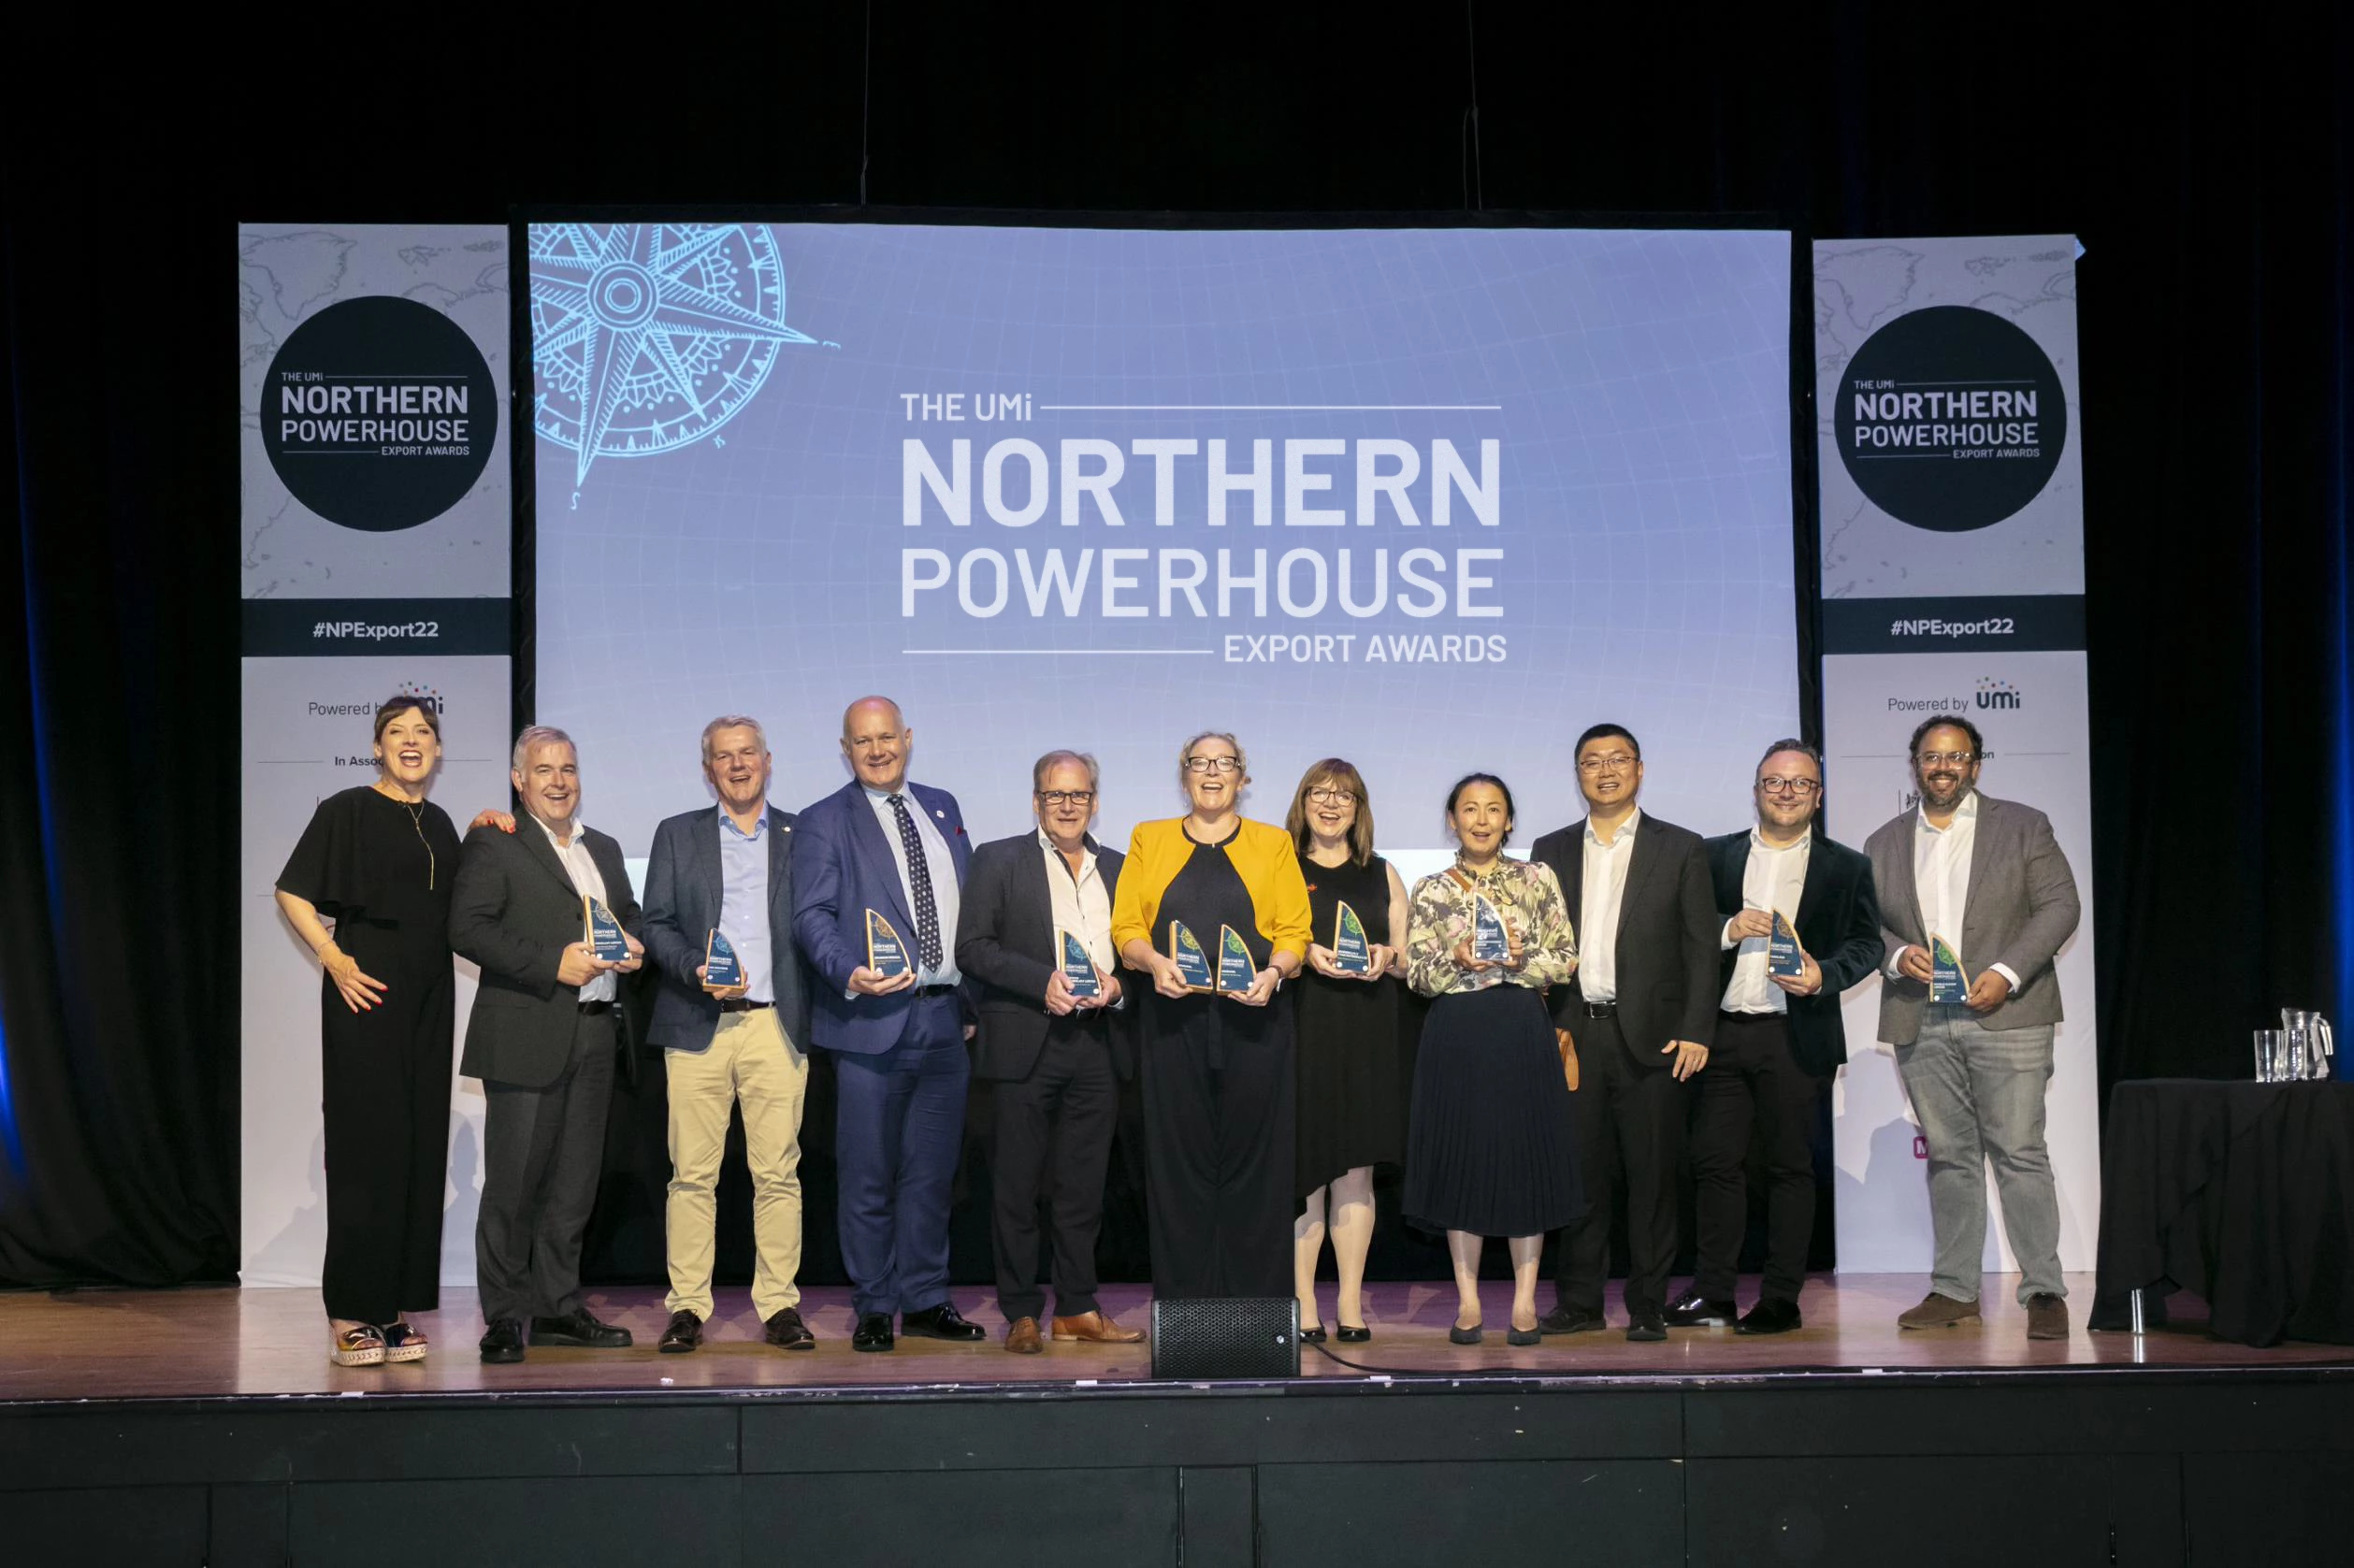 Adam Burnett, Group Marketing Director at Fabulosa (second from far right) pictured with the other Northern Powerhouse Export Award Winners